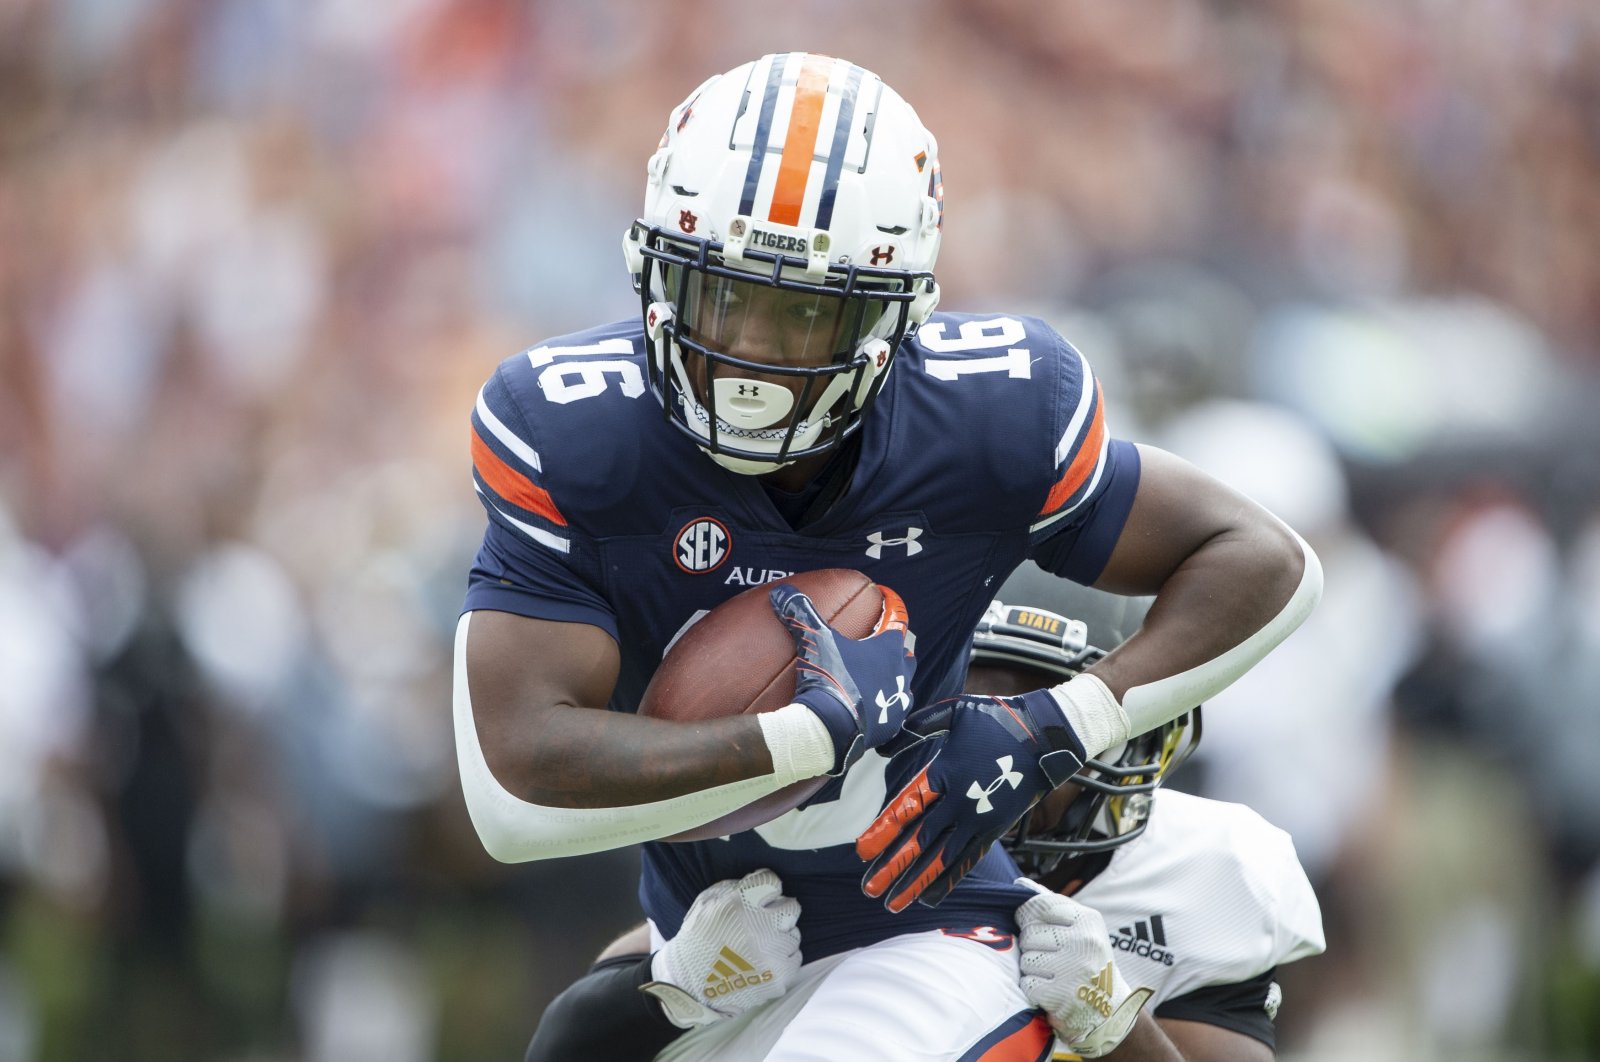 Wide receiver Malcolm Johnson Jr. (16) of the Auburn Tigers catches a pass in front of defensive back Kimar Martin (25) of the Alabama State Hornets during the third quarter of play at Jordan-Hare Stadium, Auburn, Alabama, Sept. 11, 2021. (AFP Photo)